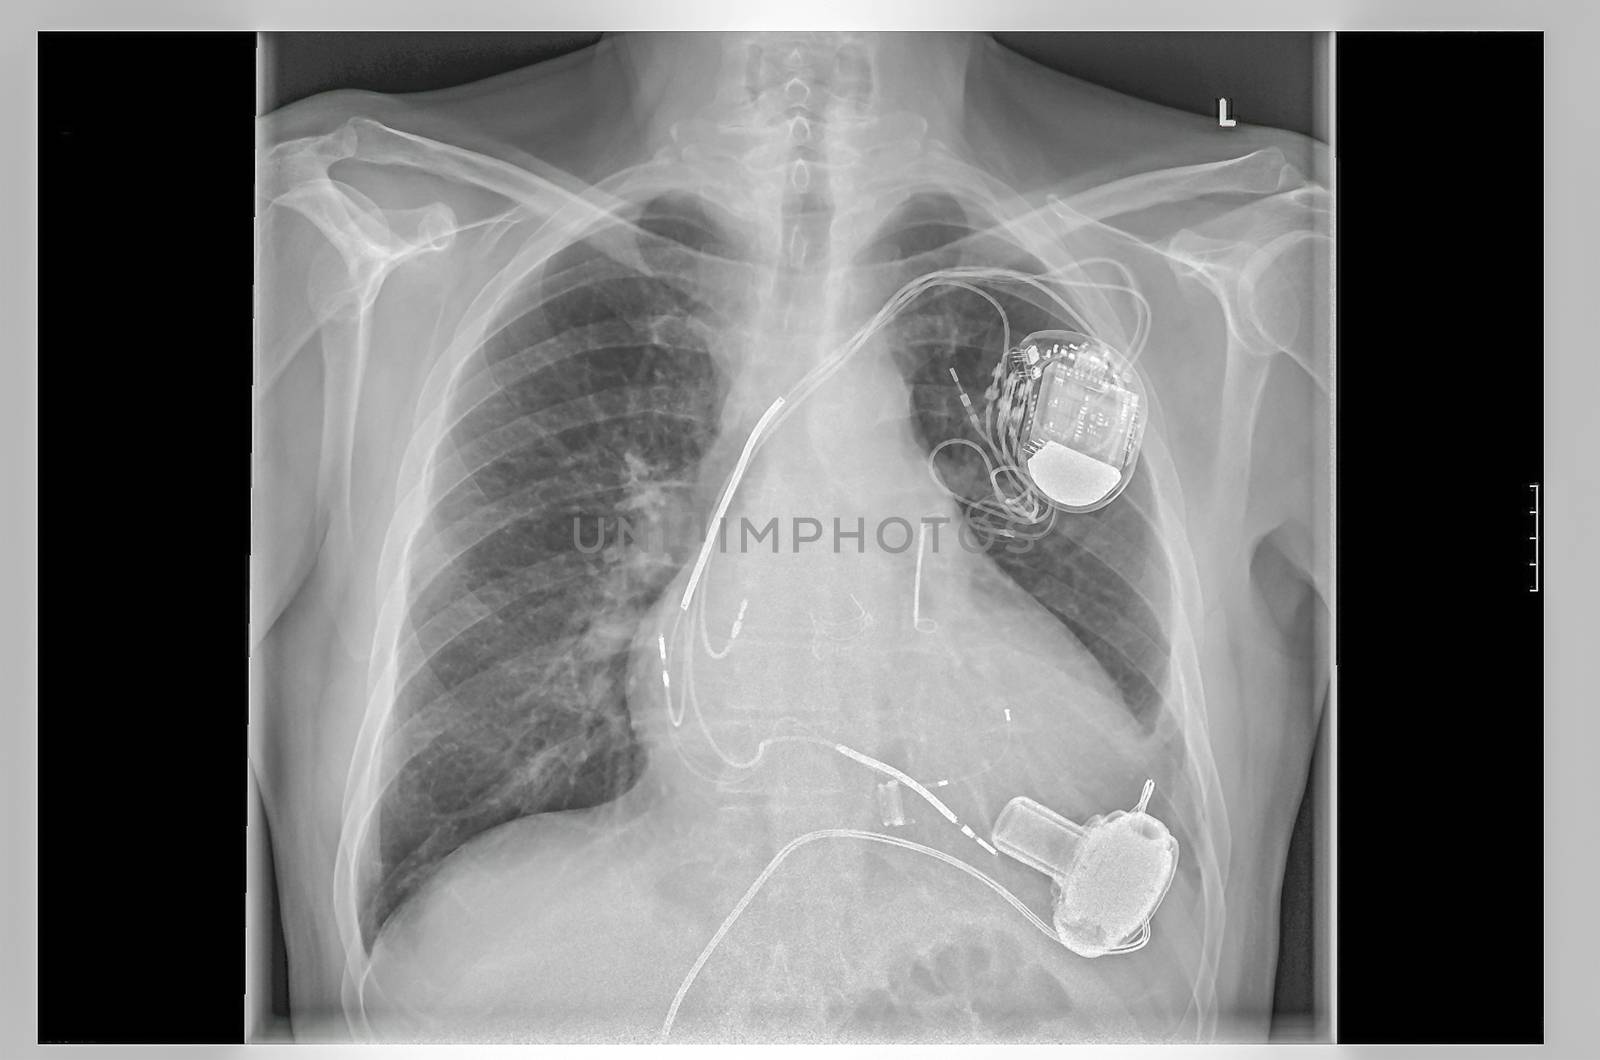 Radiograph left side of the chest. Vergößertes heart with implanted pacemaker system. Below are the pump of the heart assist system.